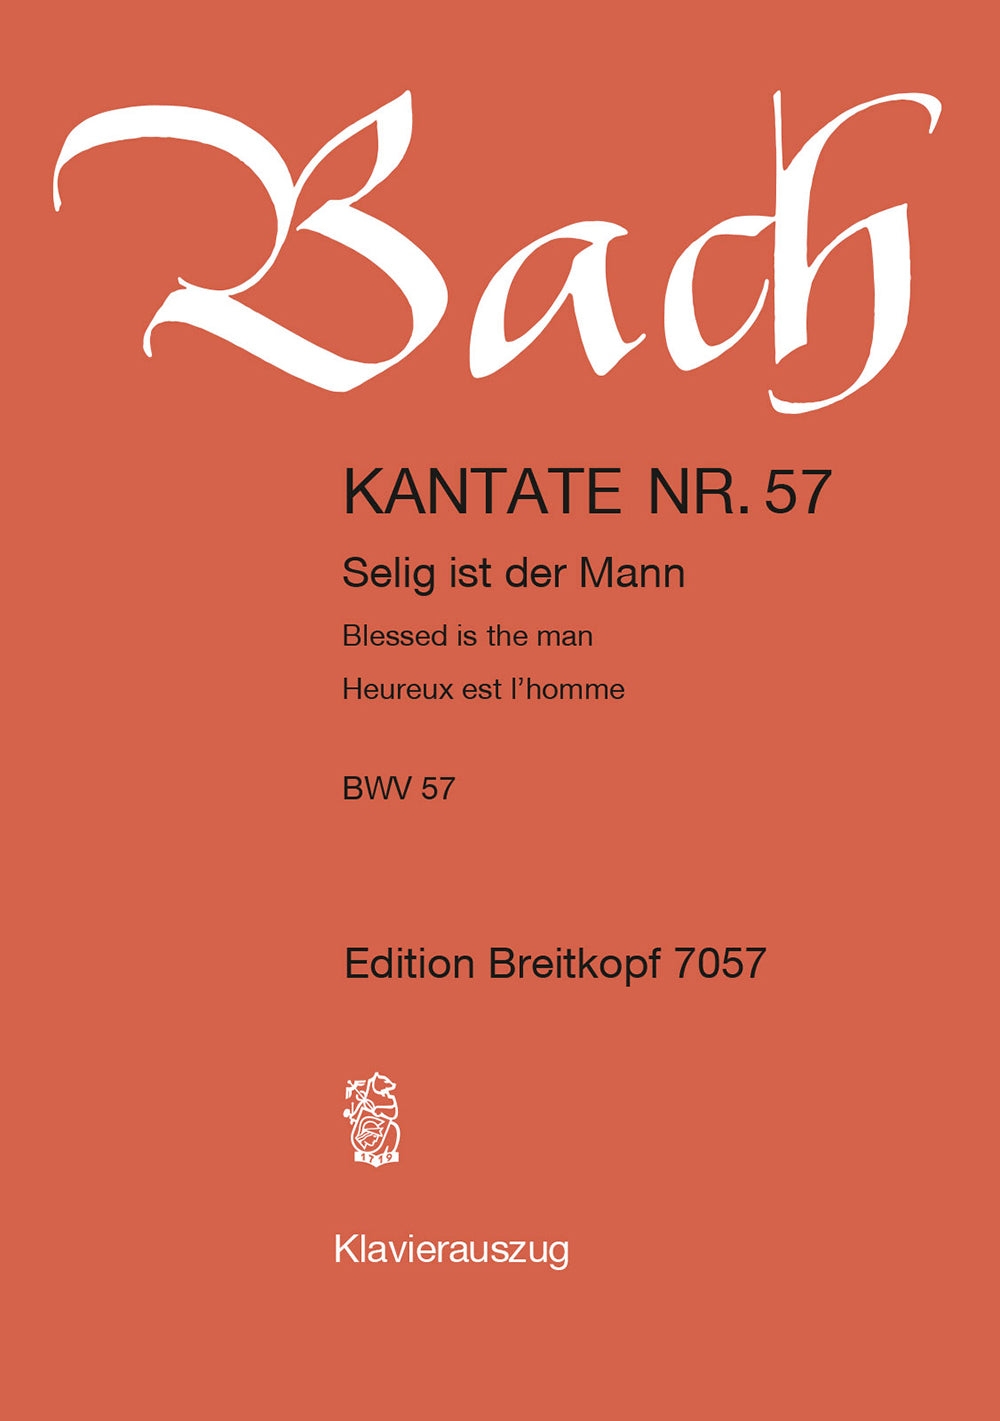 Bach: Selig ist der Mann, BWV 57 - Cantata for the 2nd Day of Christmas